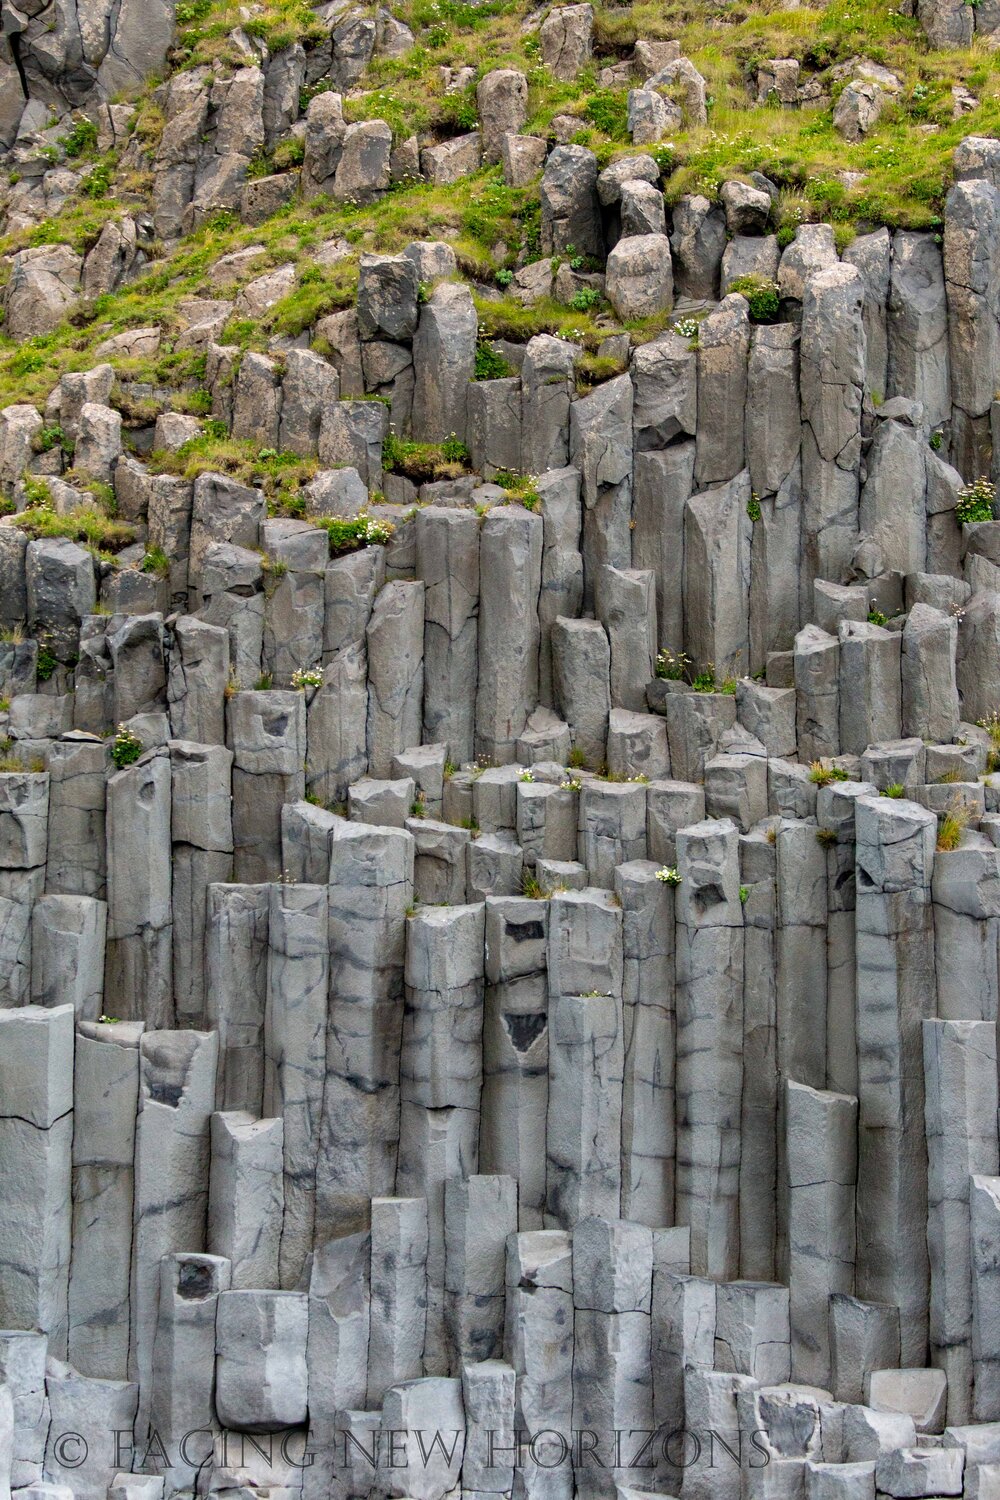  Basalt columns protruding from the beach in their natural geometric shapes 